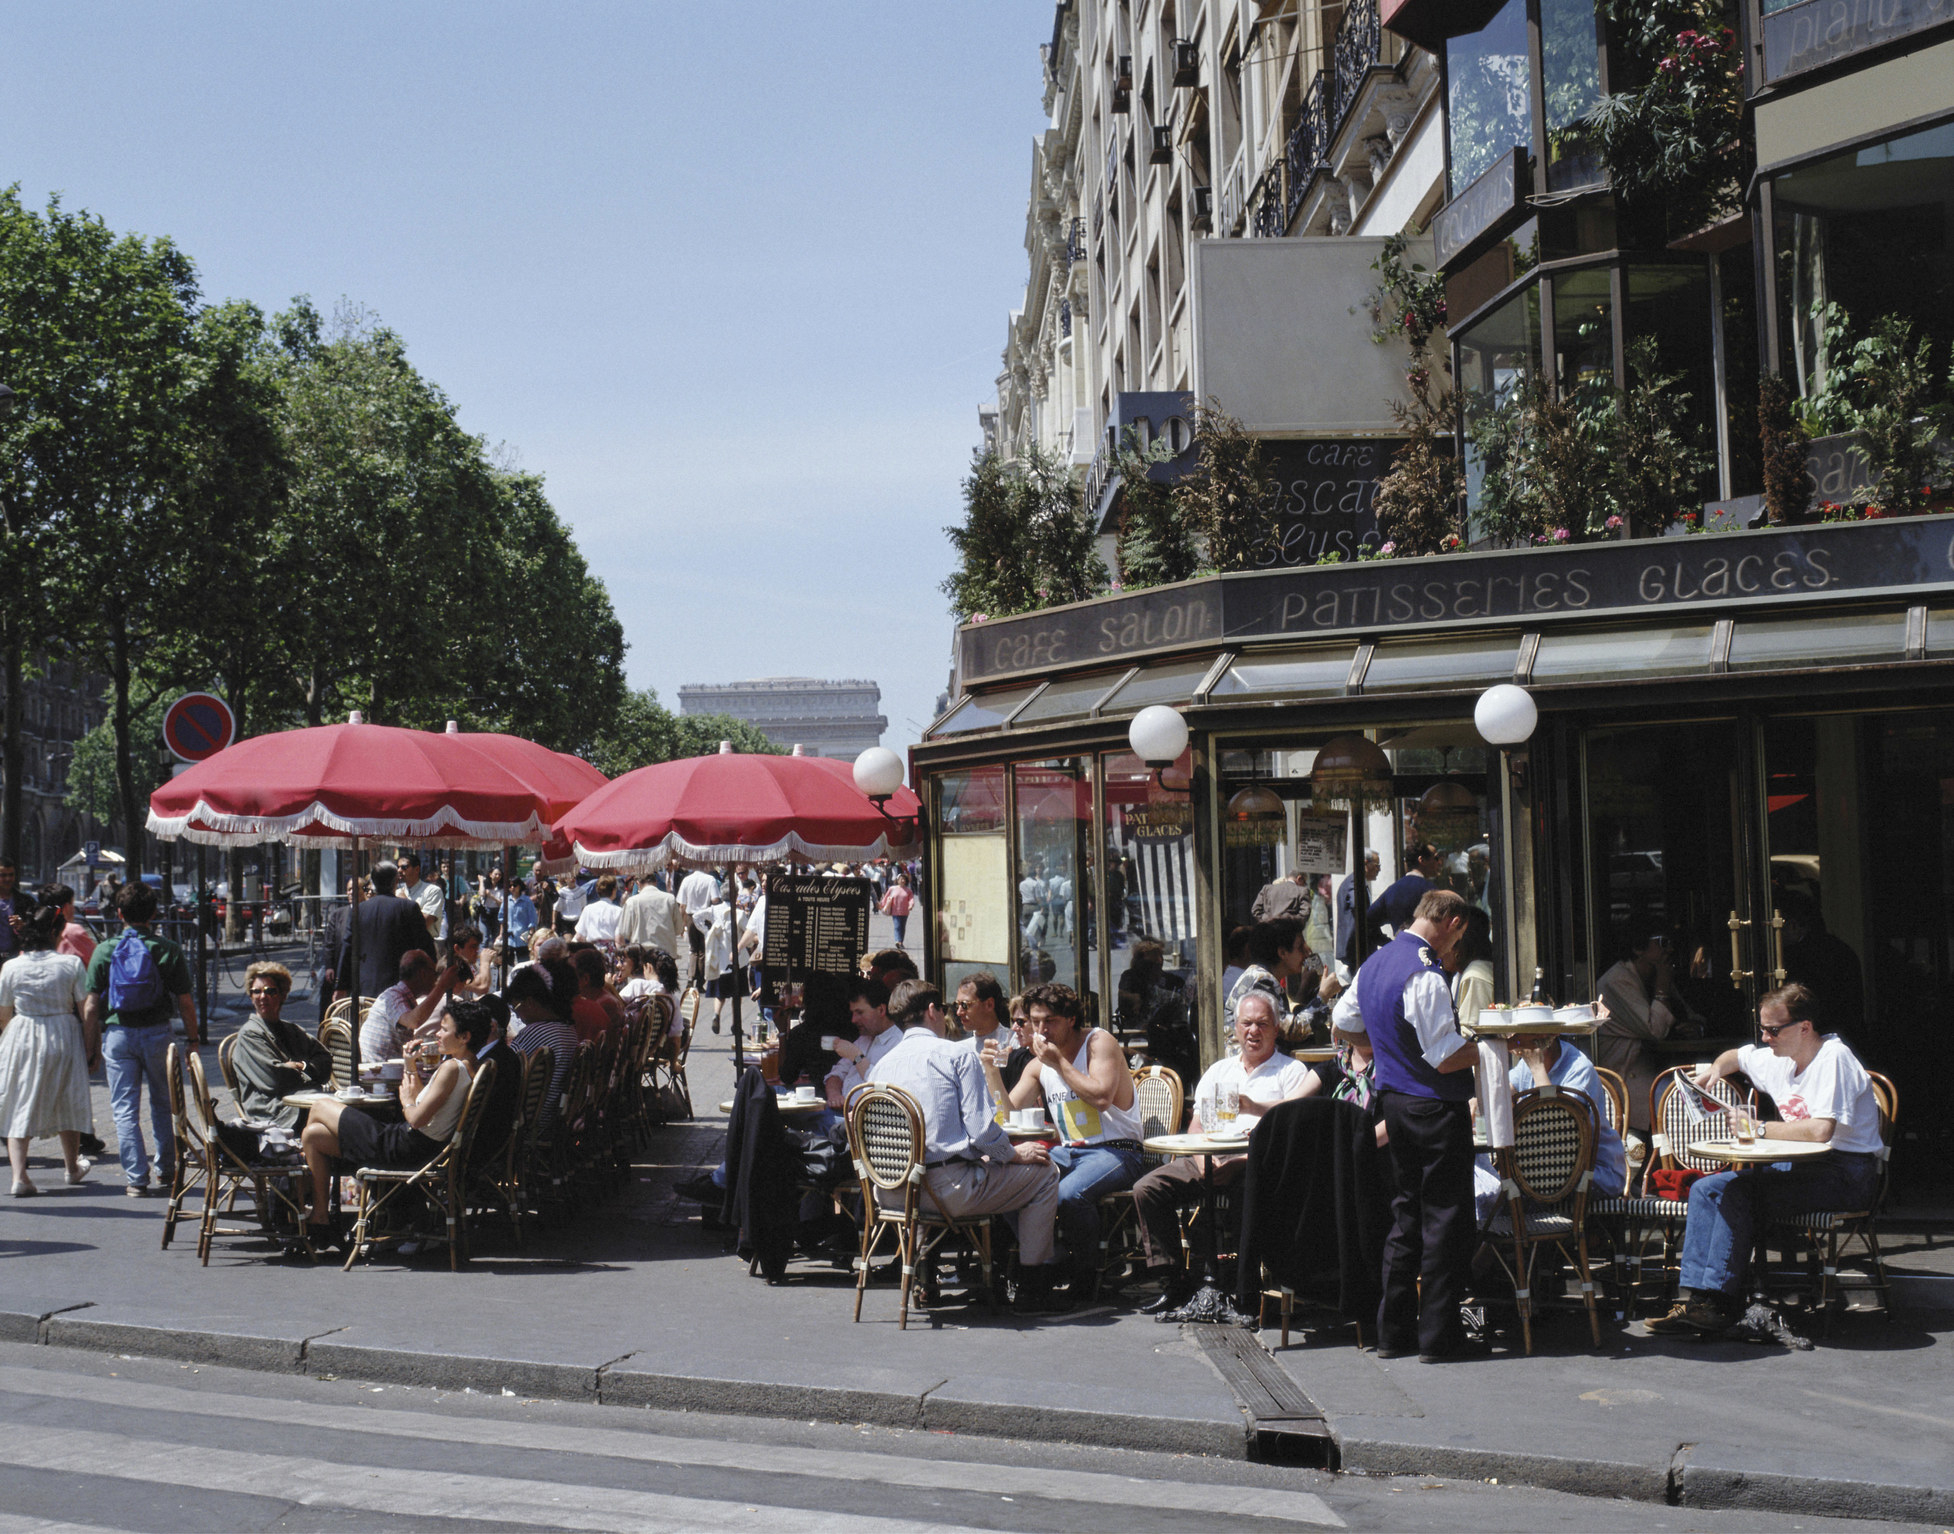 Diners eating outdoors in Paris.